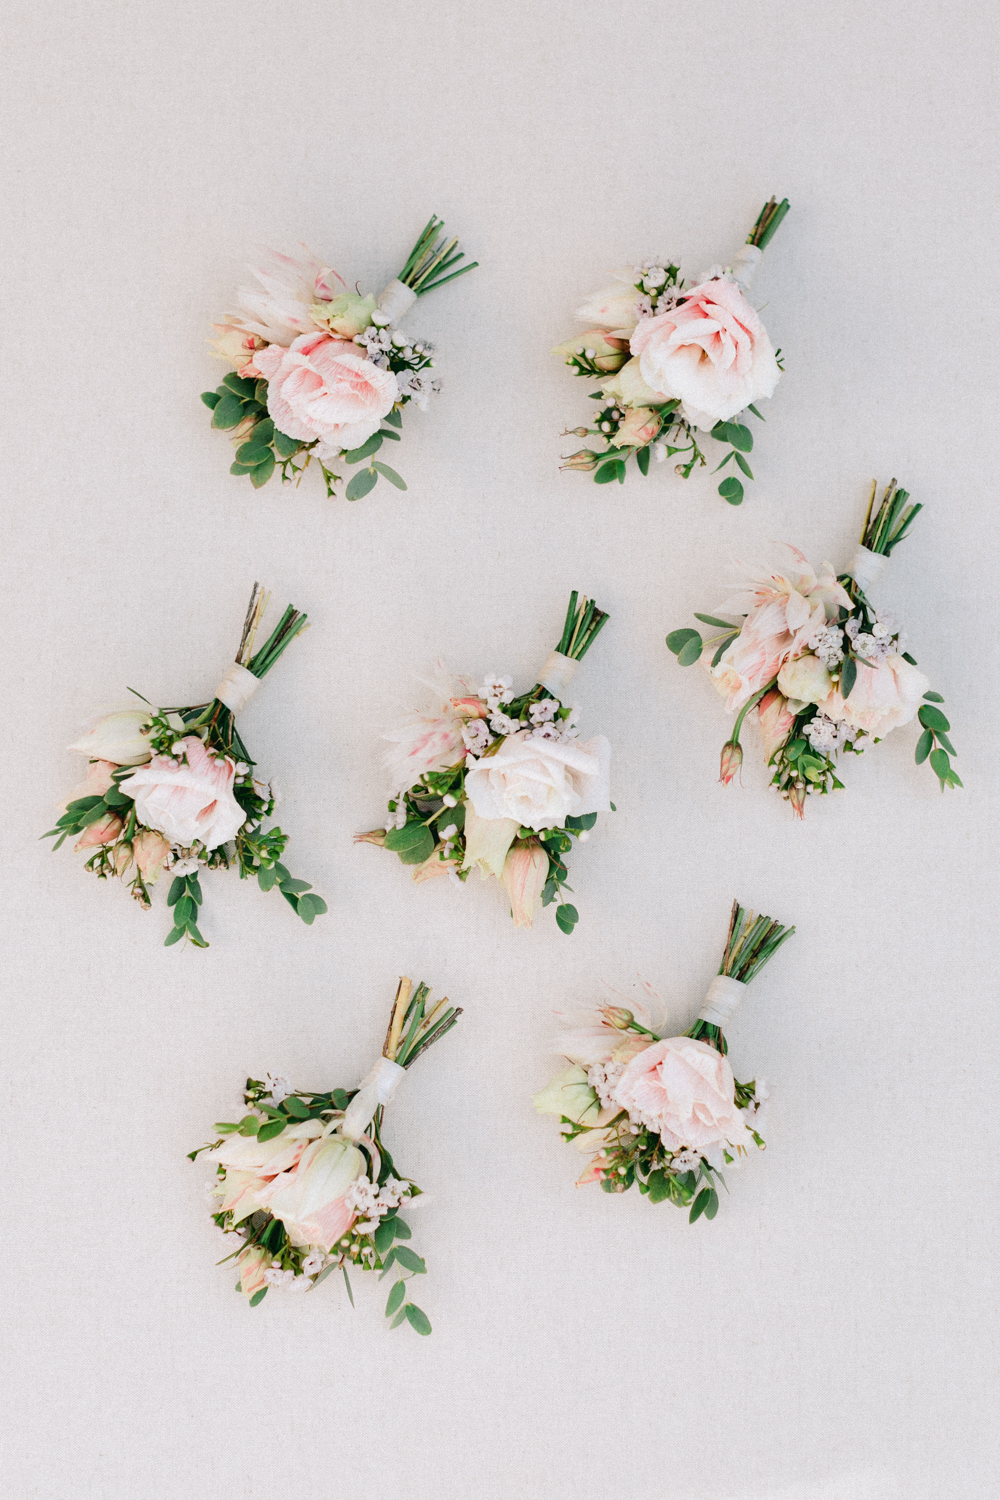 Seven wedding button holes made with pale pink roses